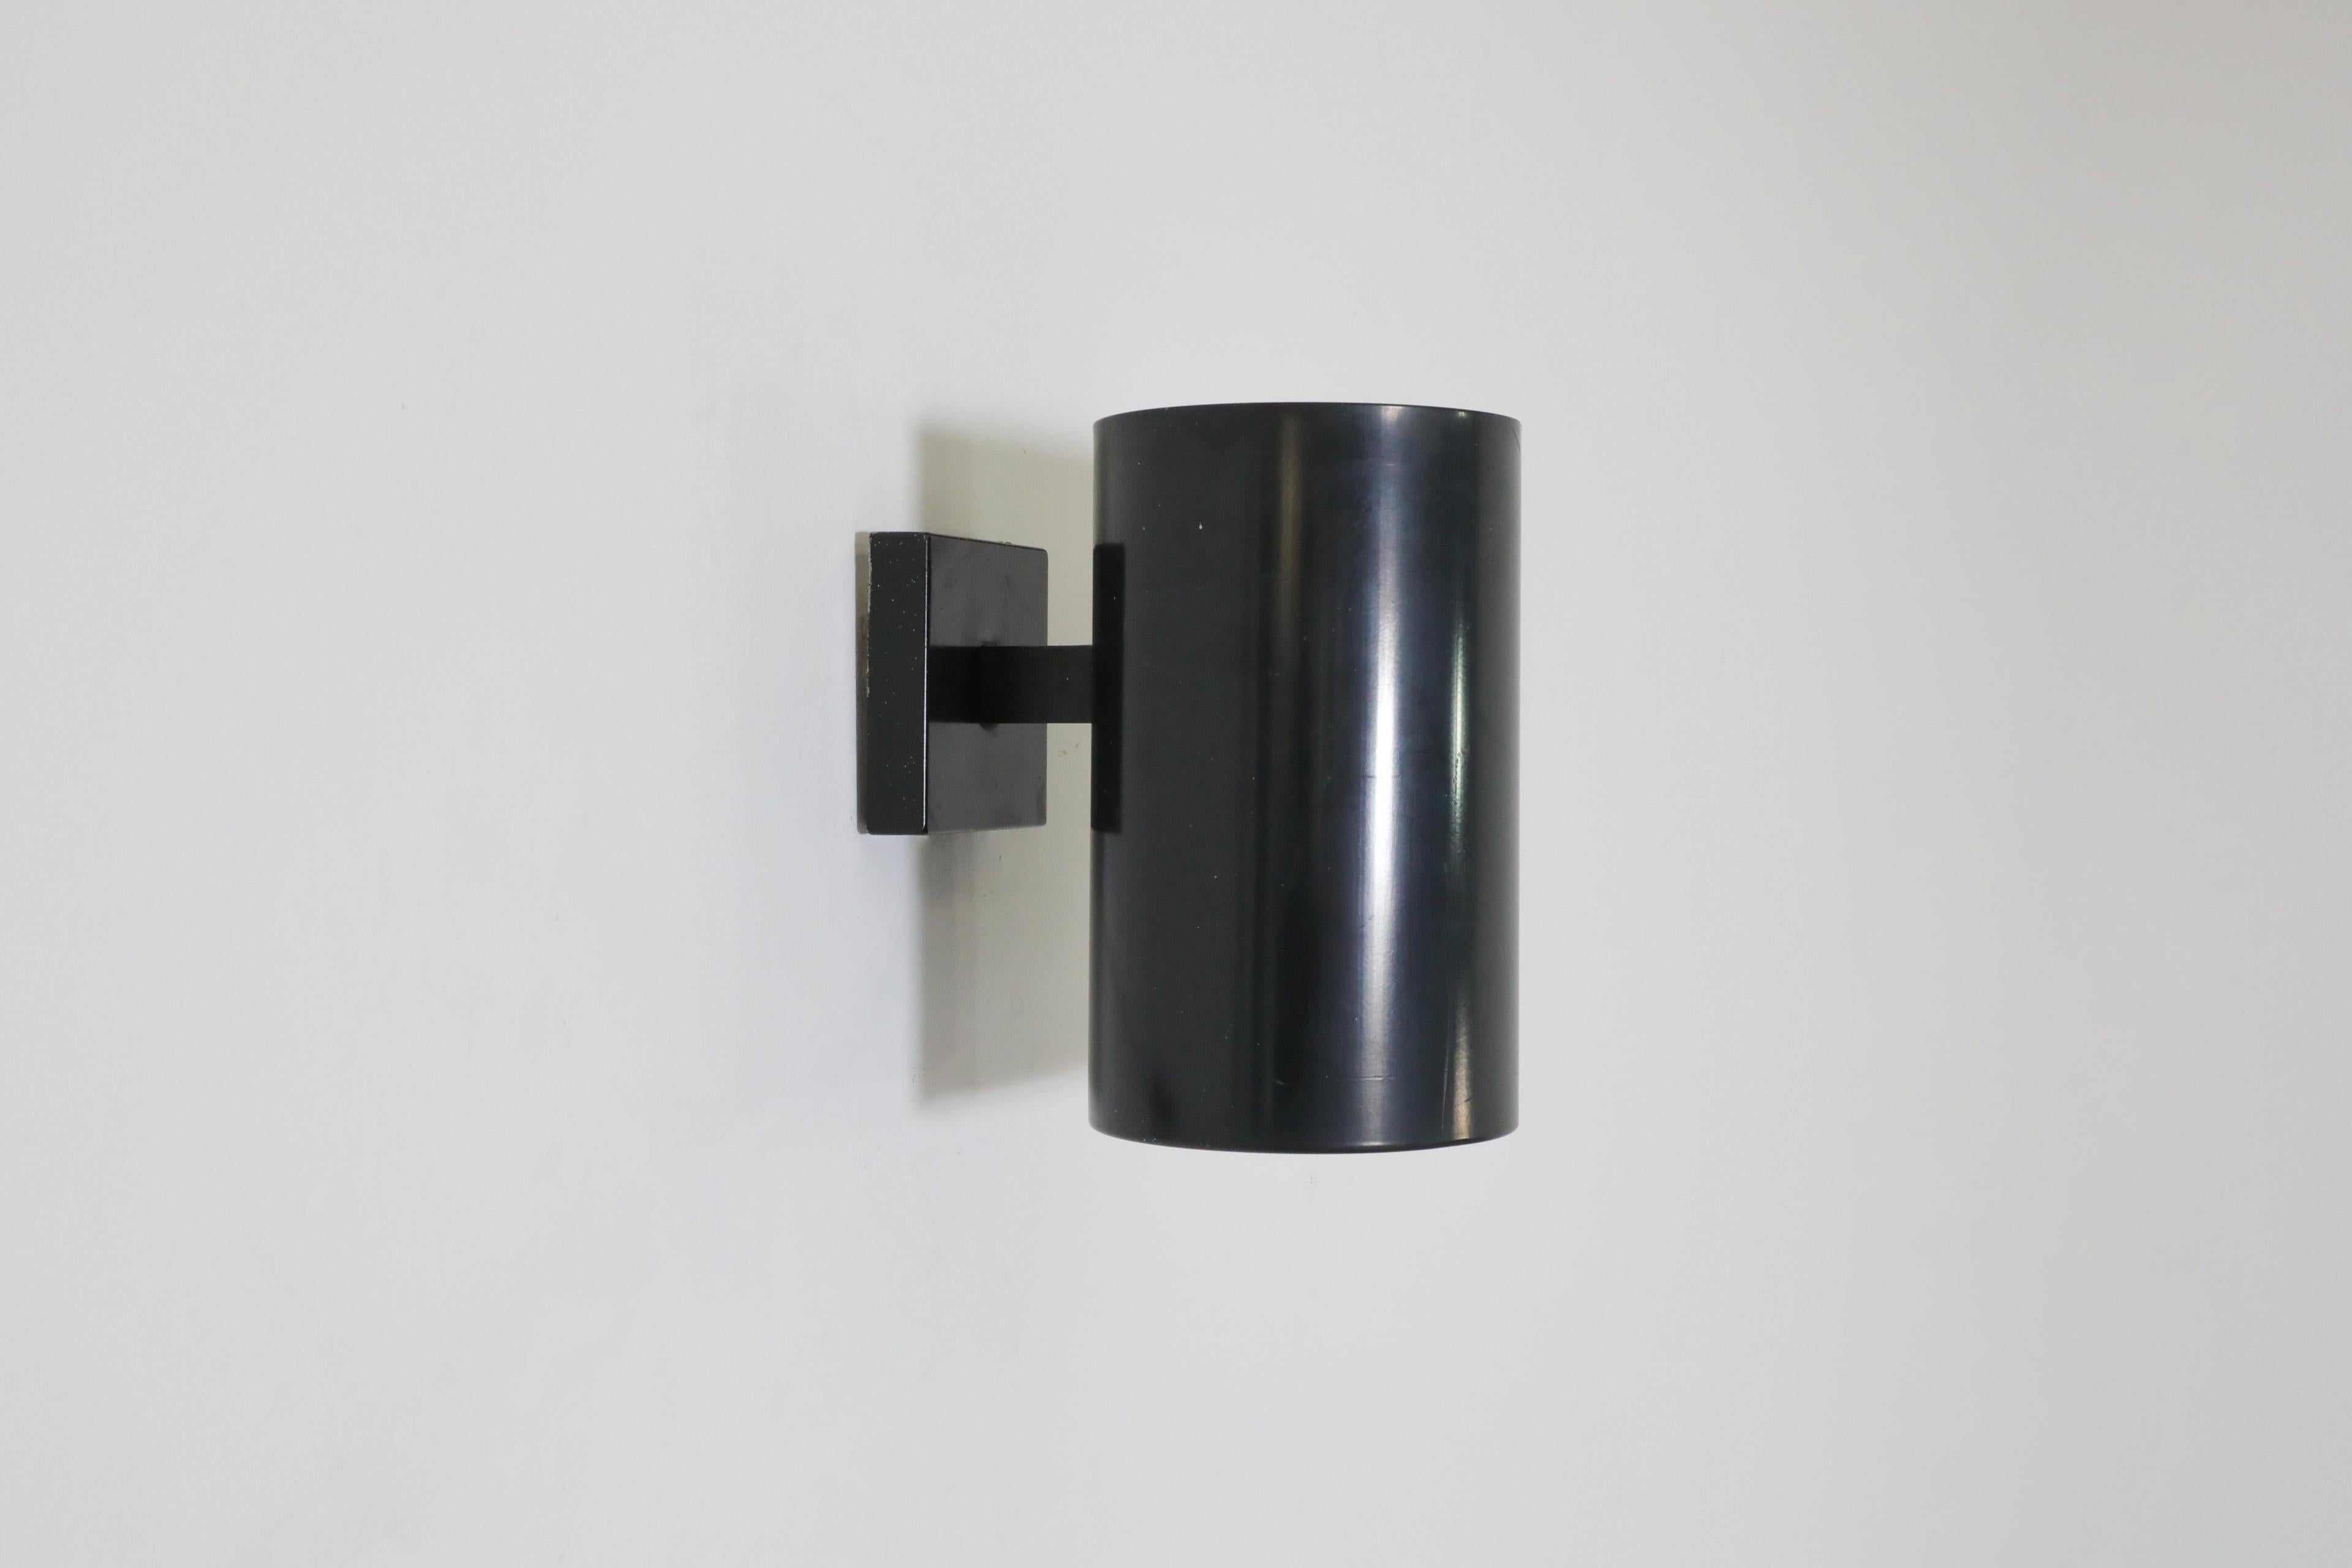 Philips Black Enameled Cylinder Wall Sconces In Good Condition For Sale In Los Angeles, CA